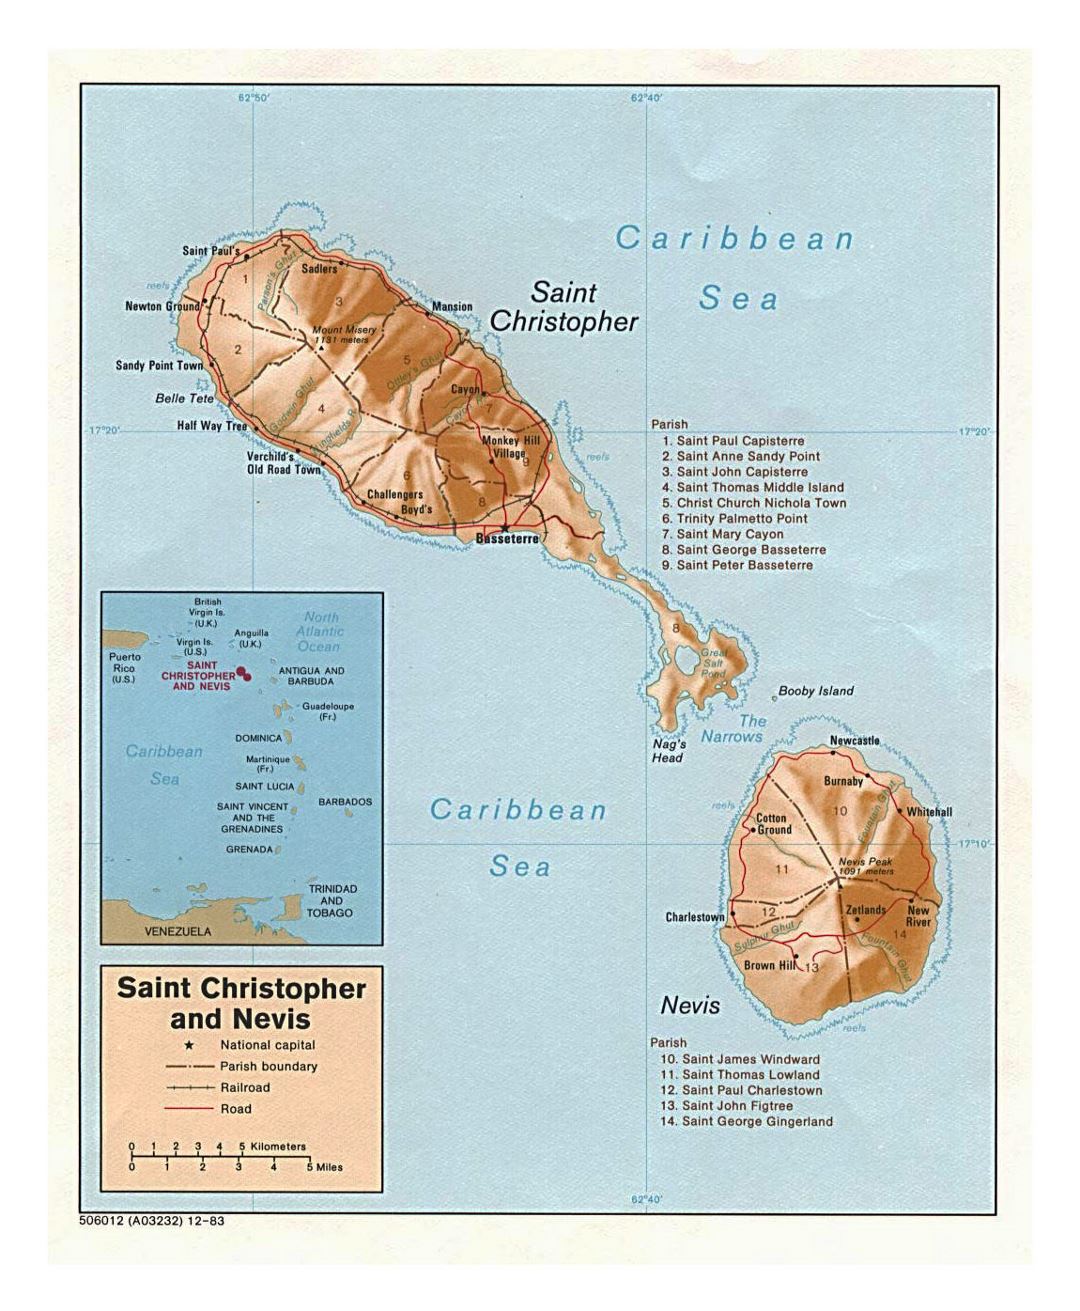 Large political and administrative map of Saint Kitts and Nevis with relief, roads, railroads and cities - 1983